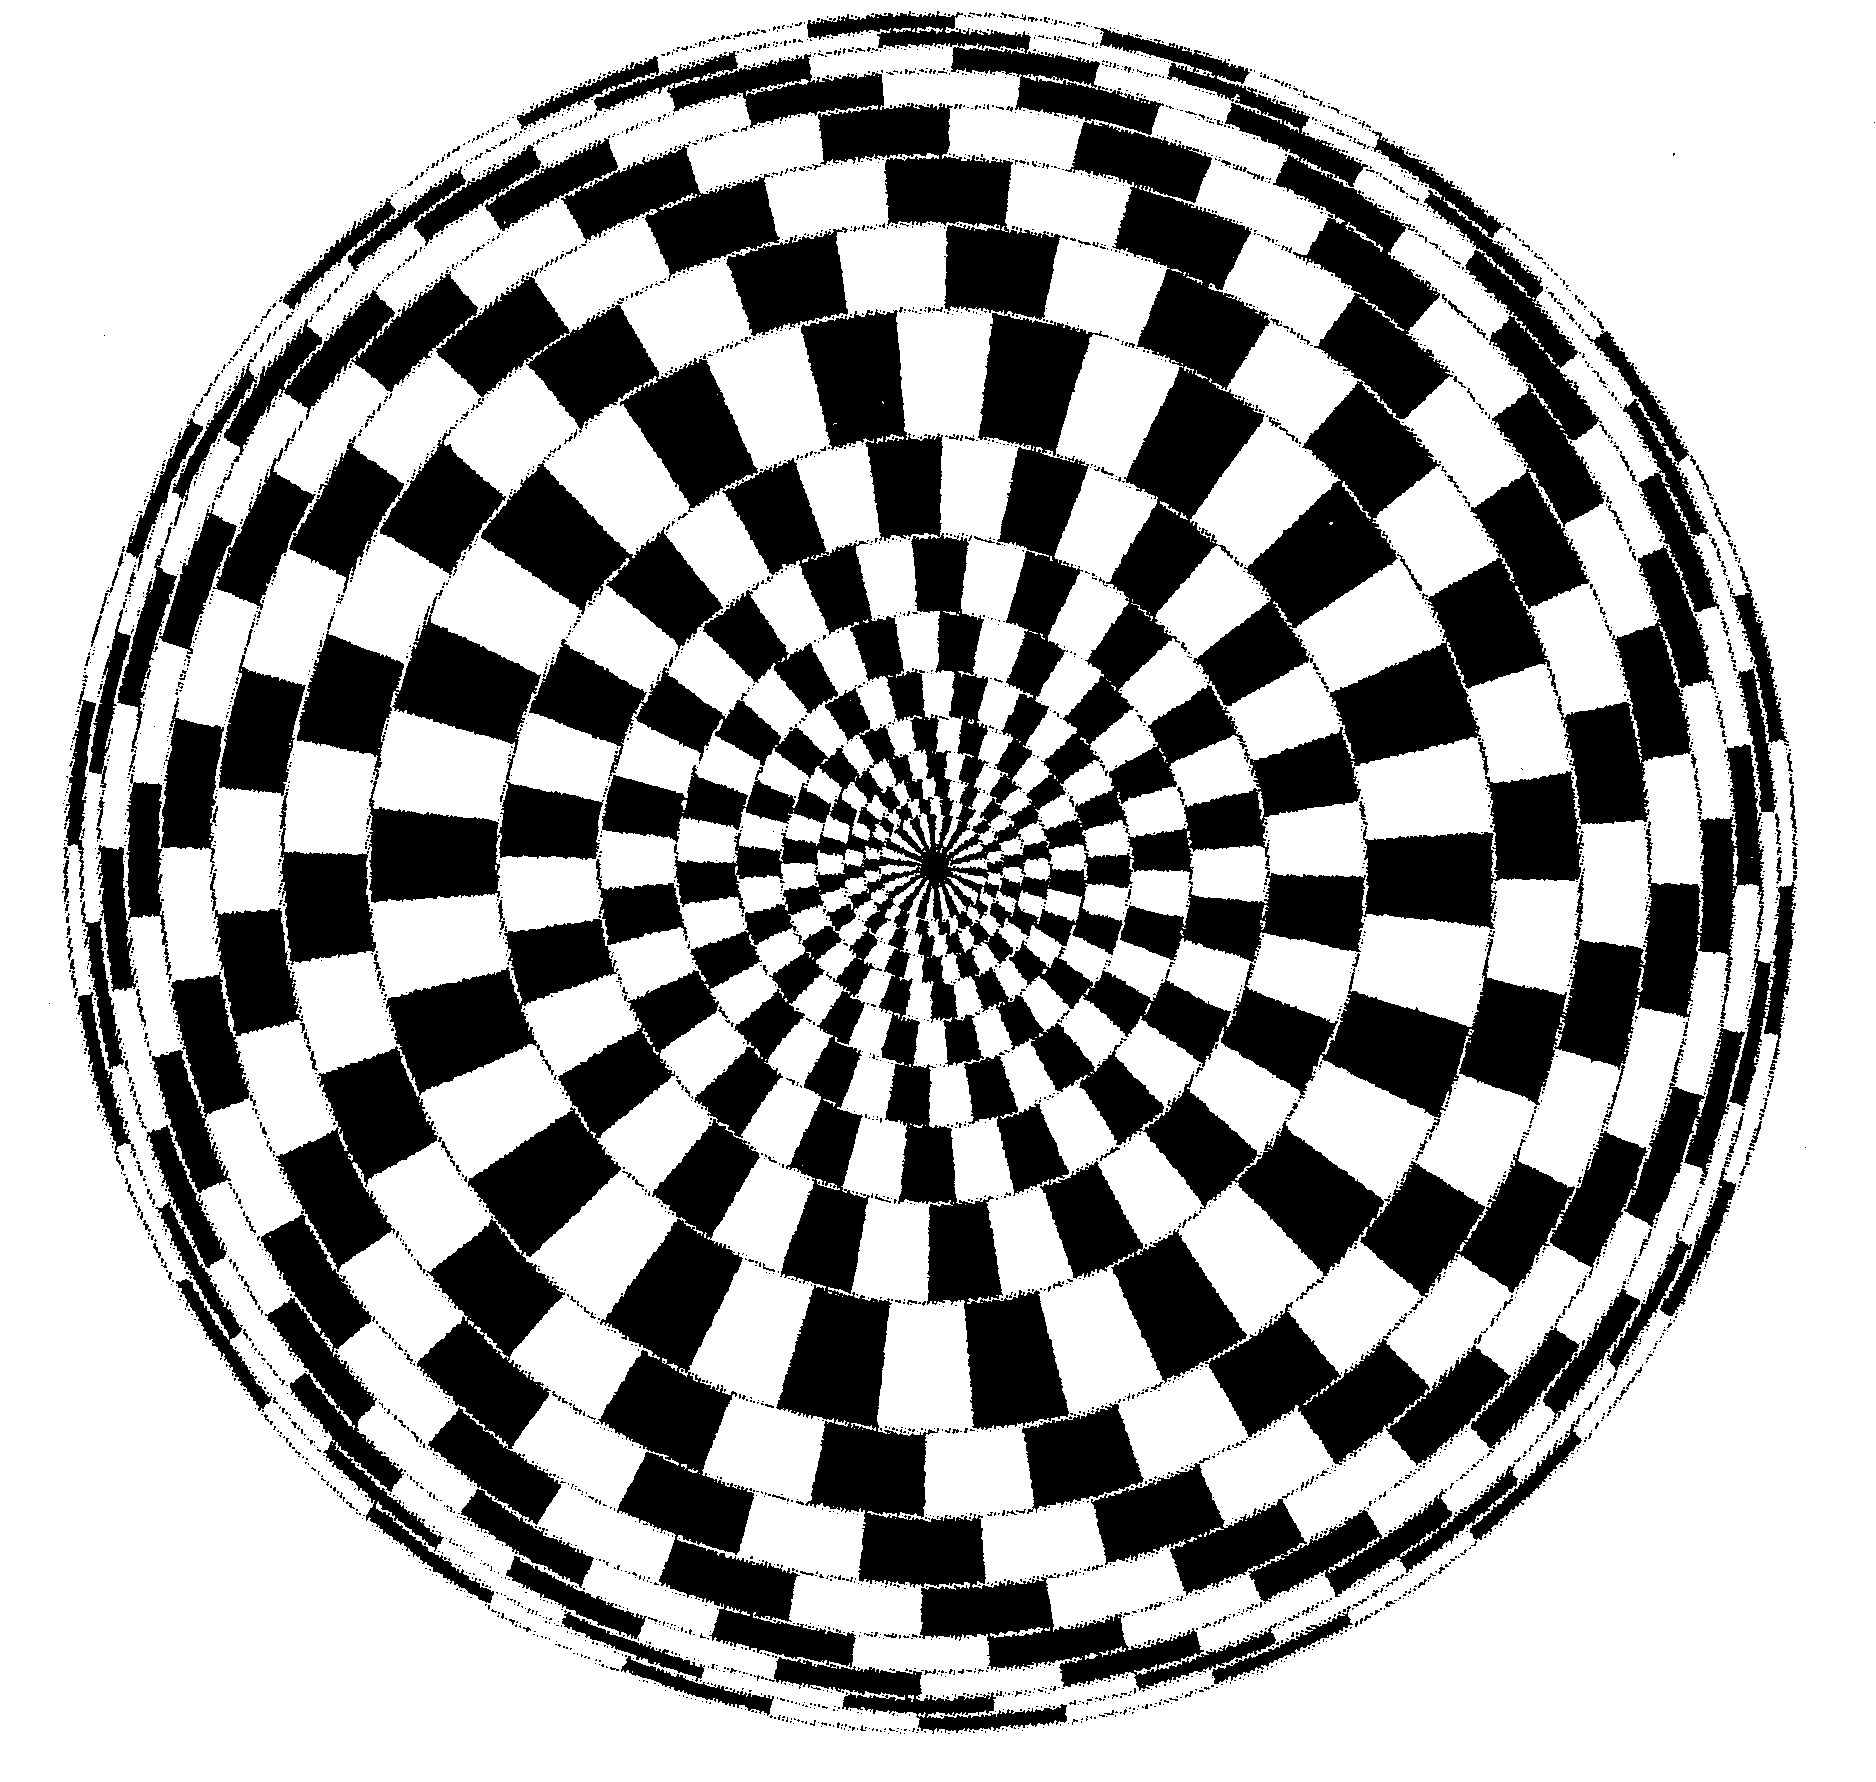 this appears to be a spiral but it is really a seriesof wow medium